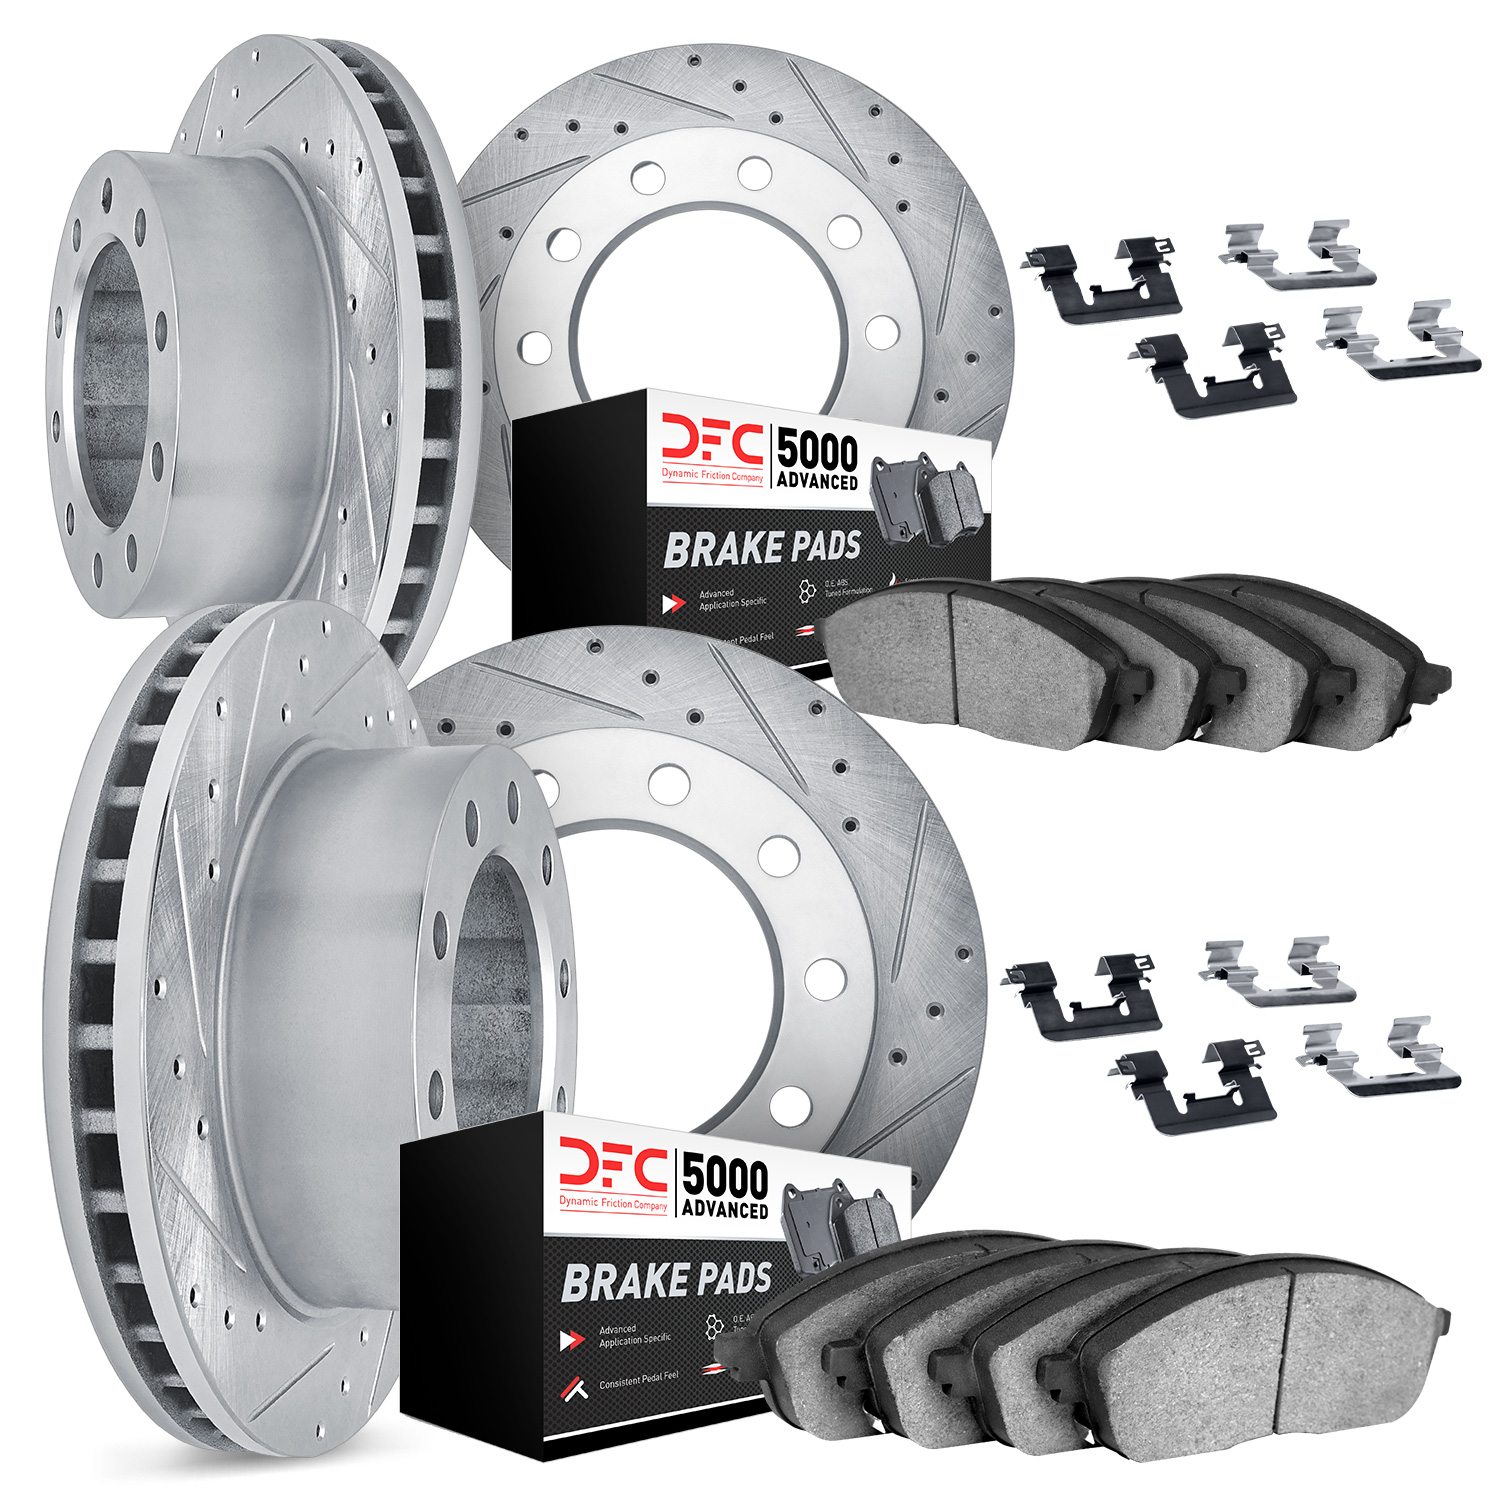 7514-54409 Drilled/Slotted Brake Rotors w/5000 Advanced Brake Pads Kit & Hardware [Silver], Fits Select Ford/Lincoln/Mercury/Maz